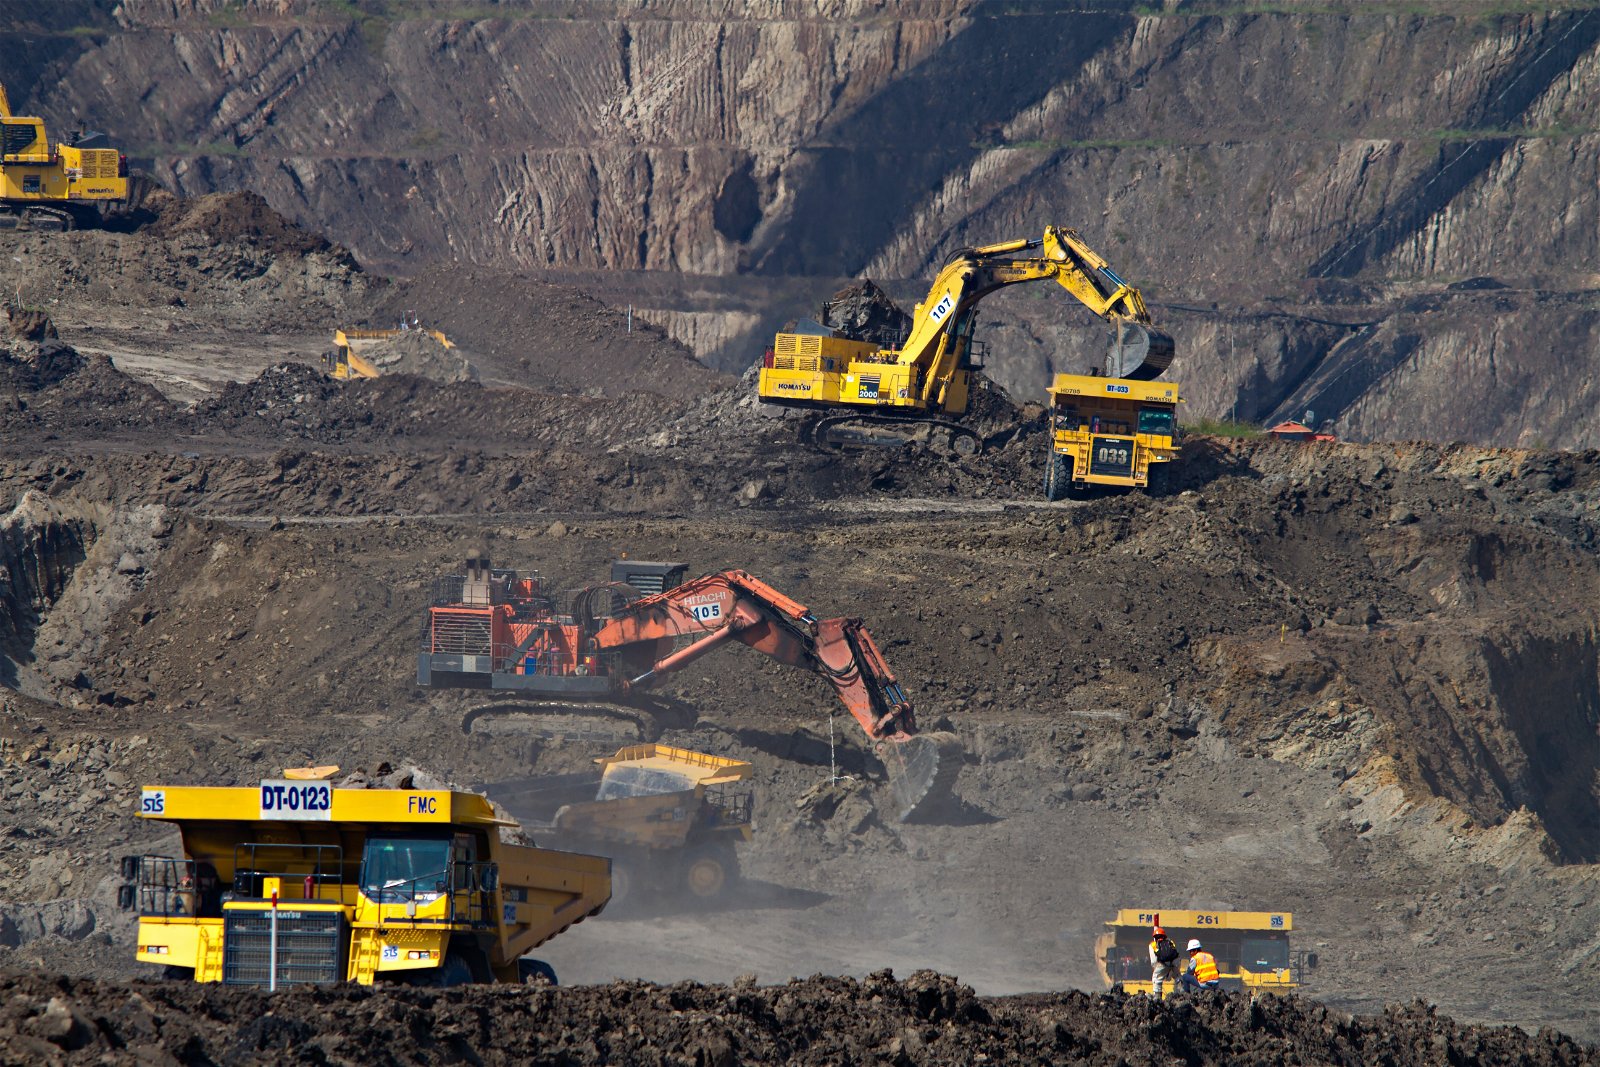 There are different types of coal mining